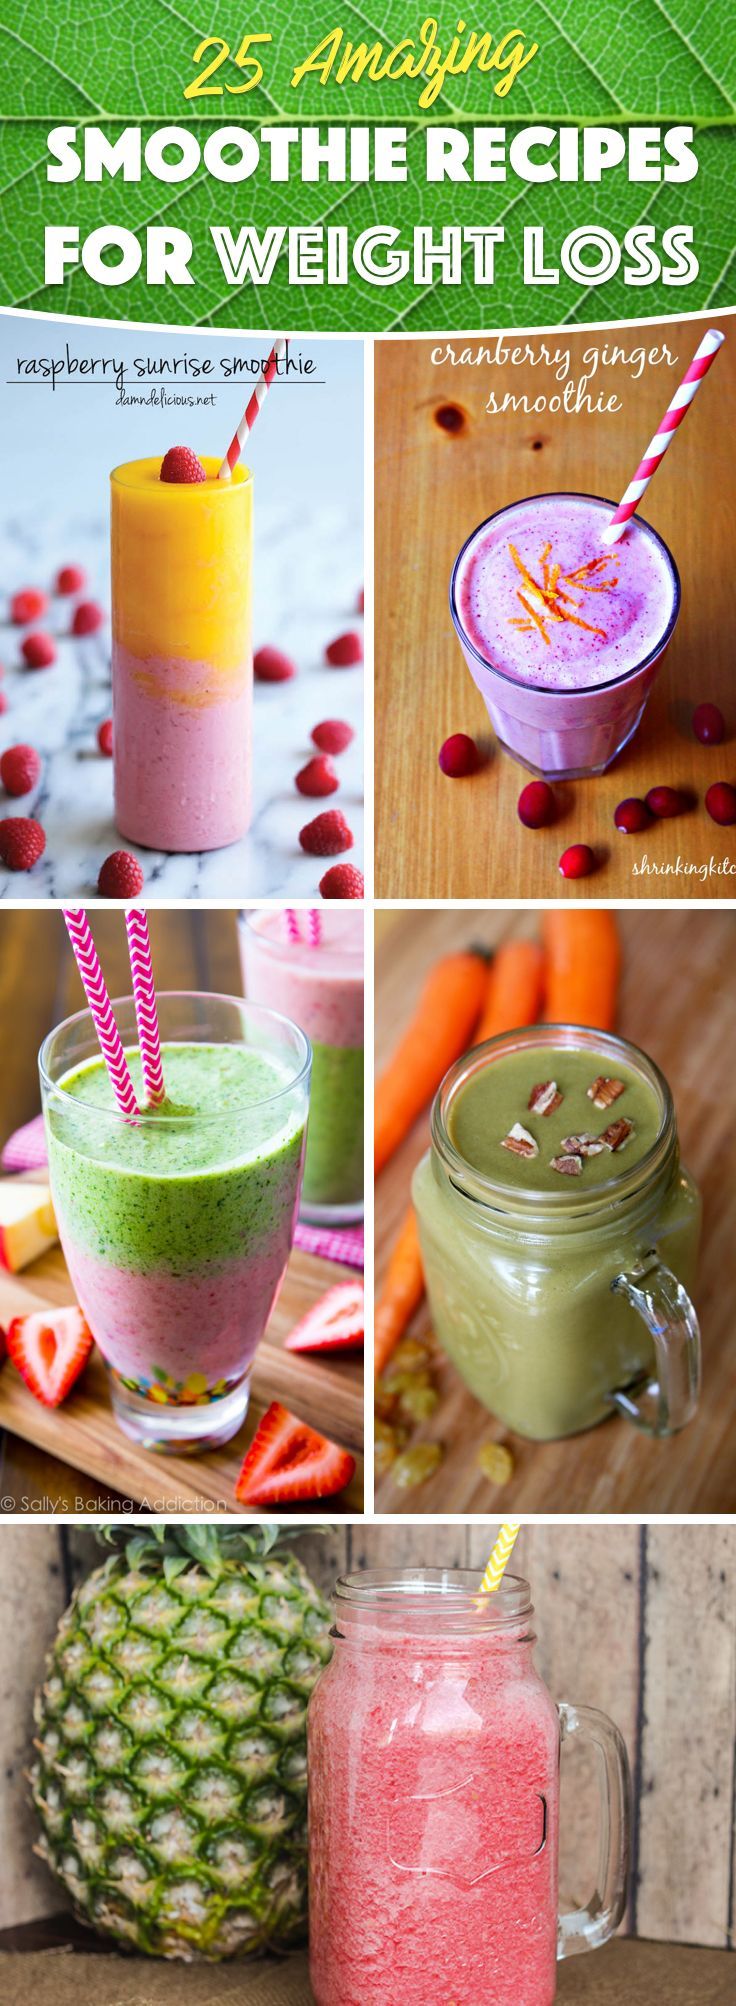 25 Amazing Smoothie Recipes for Weight Loss -   19 healthy recipes for picky eaters
 ideas